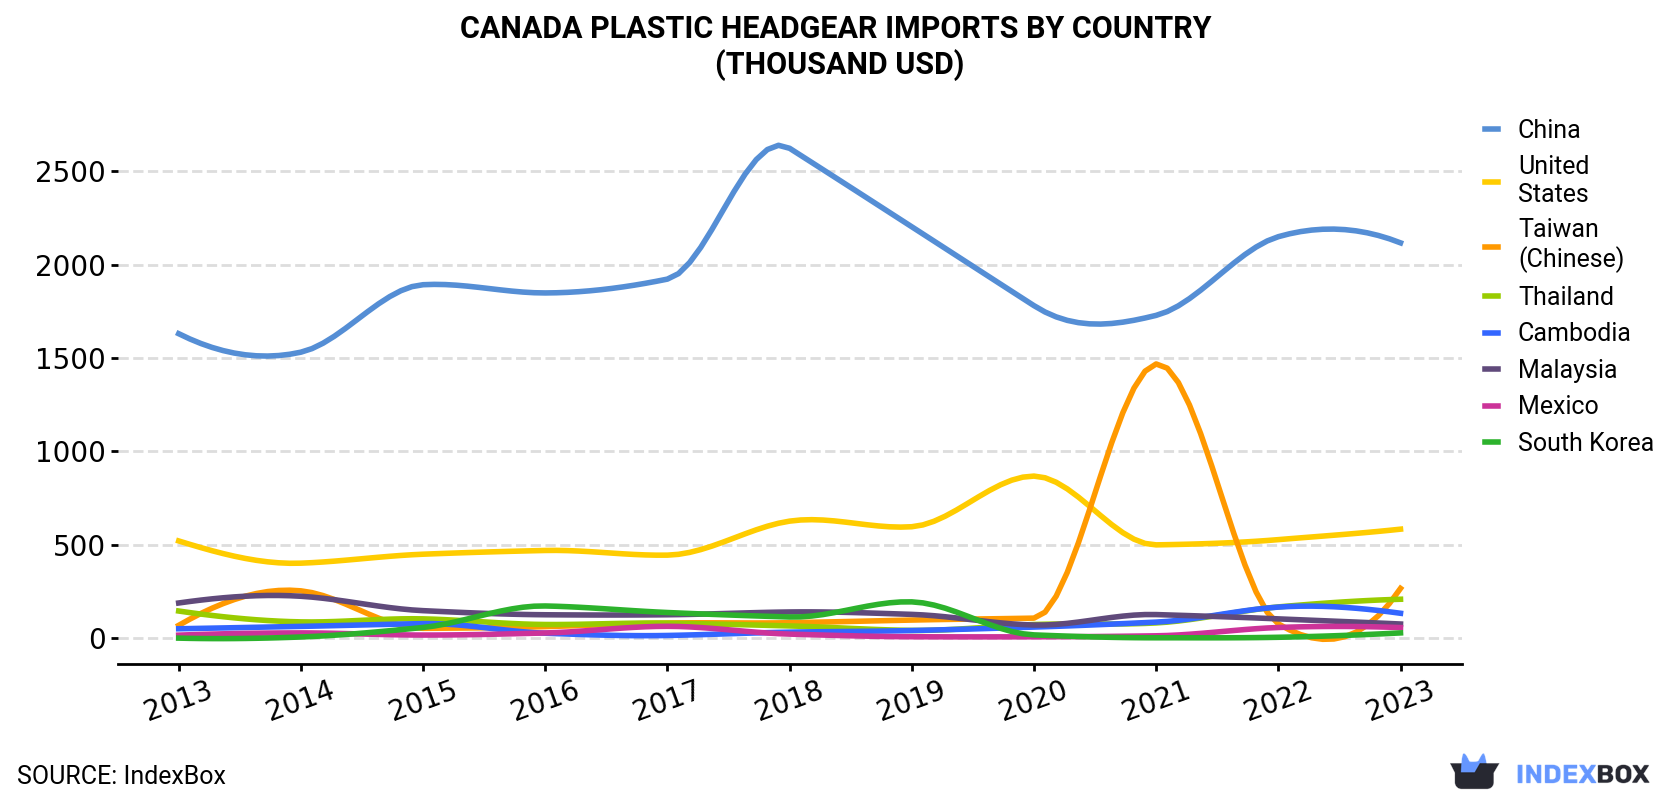 Canada Plastic Headgear Imports By Country (Thousand USD)